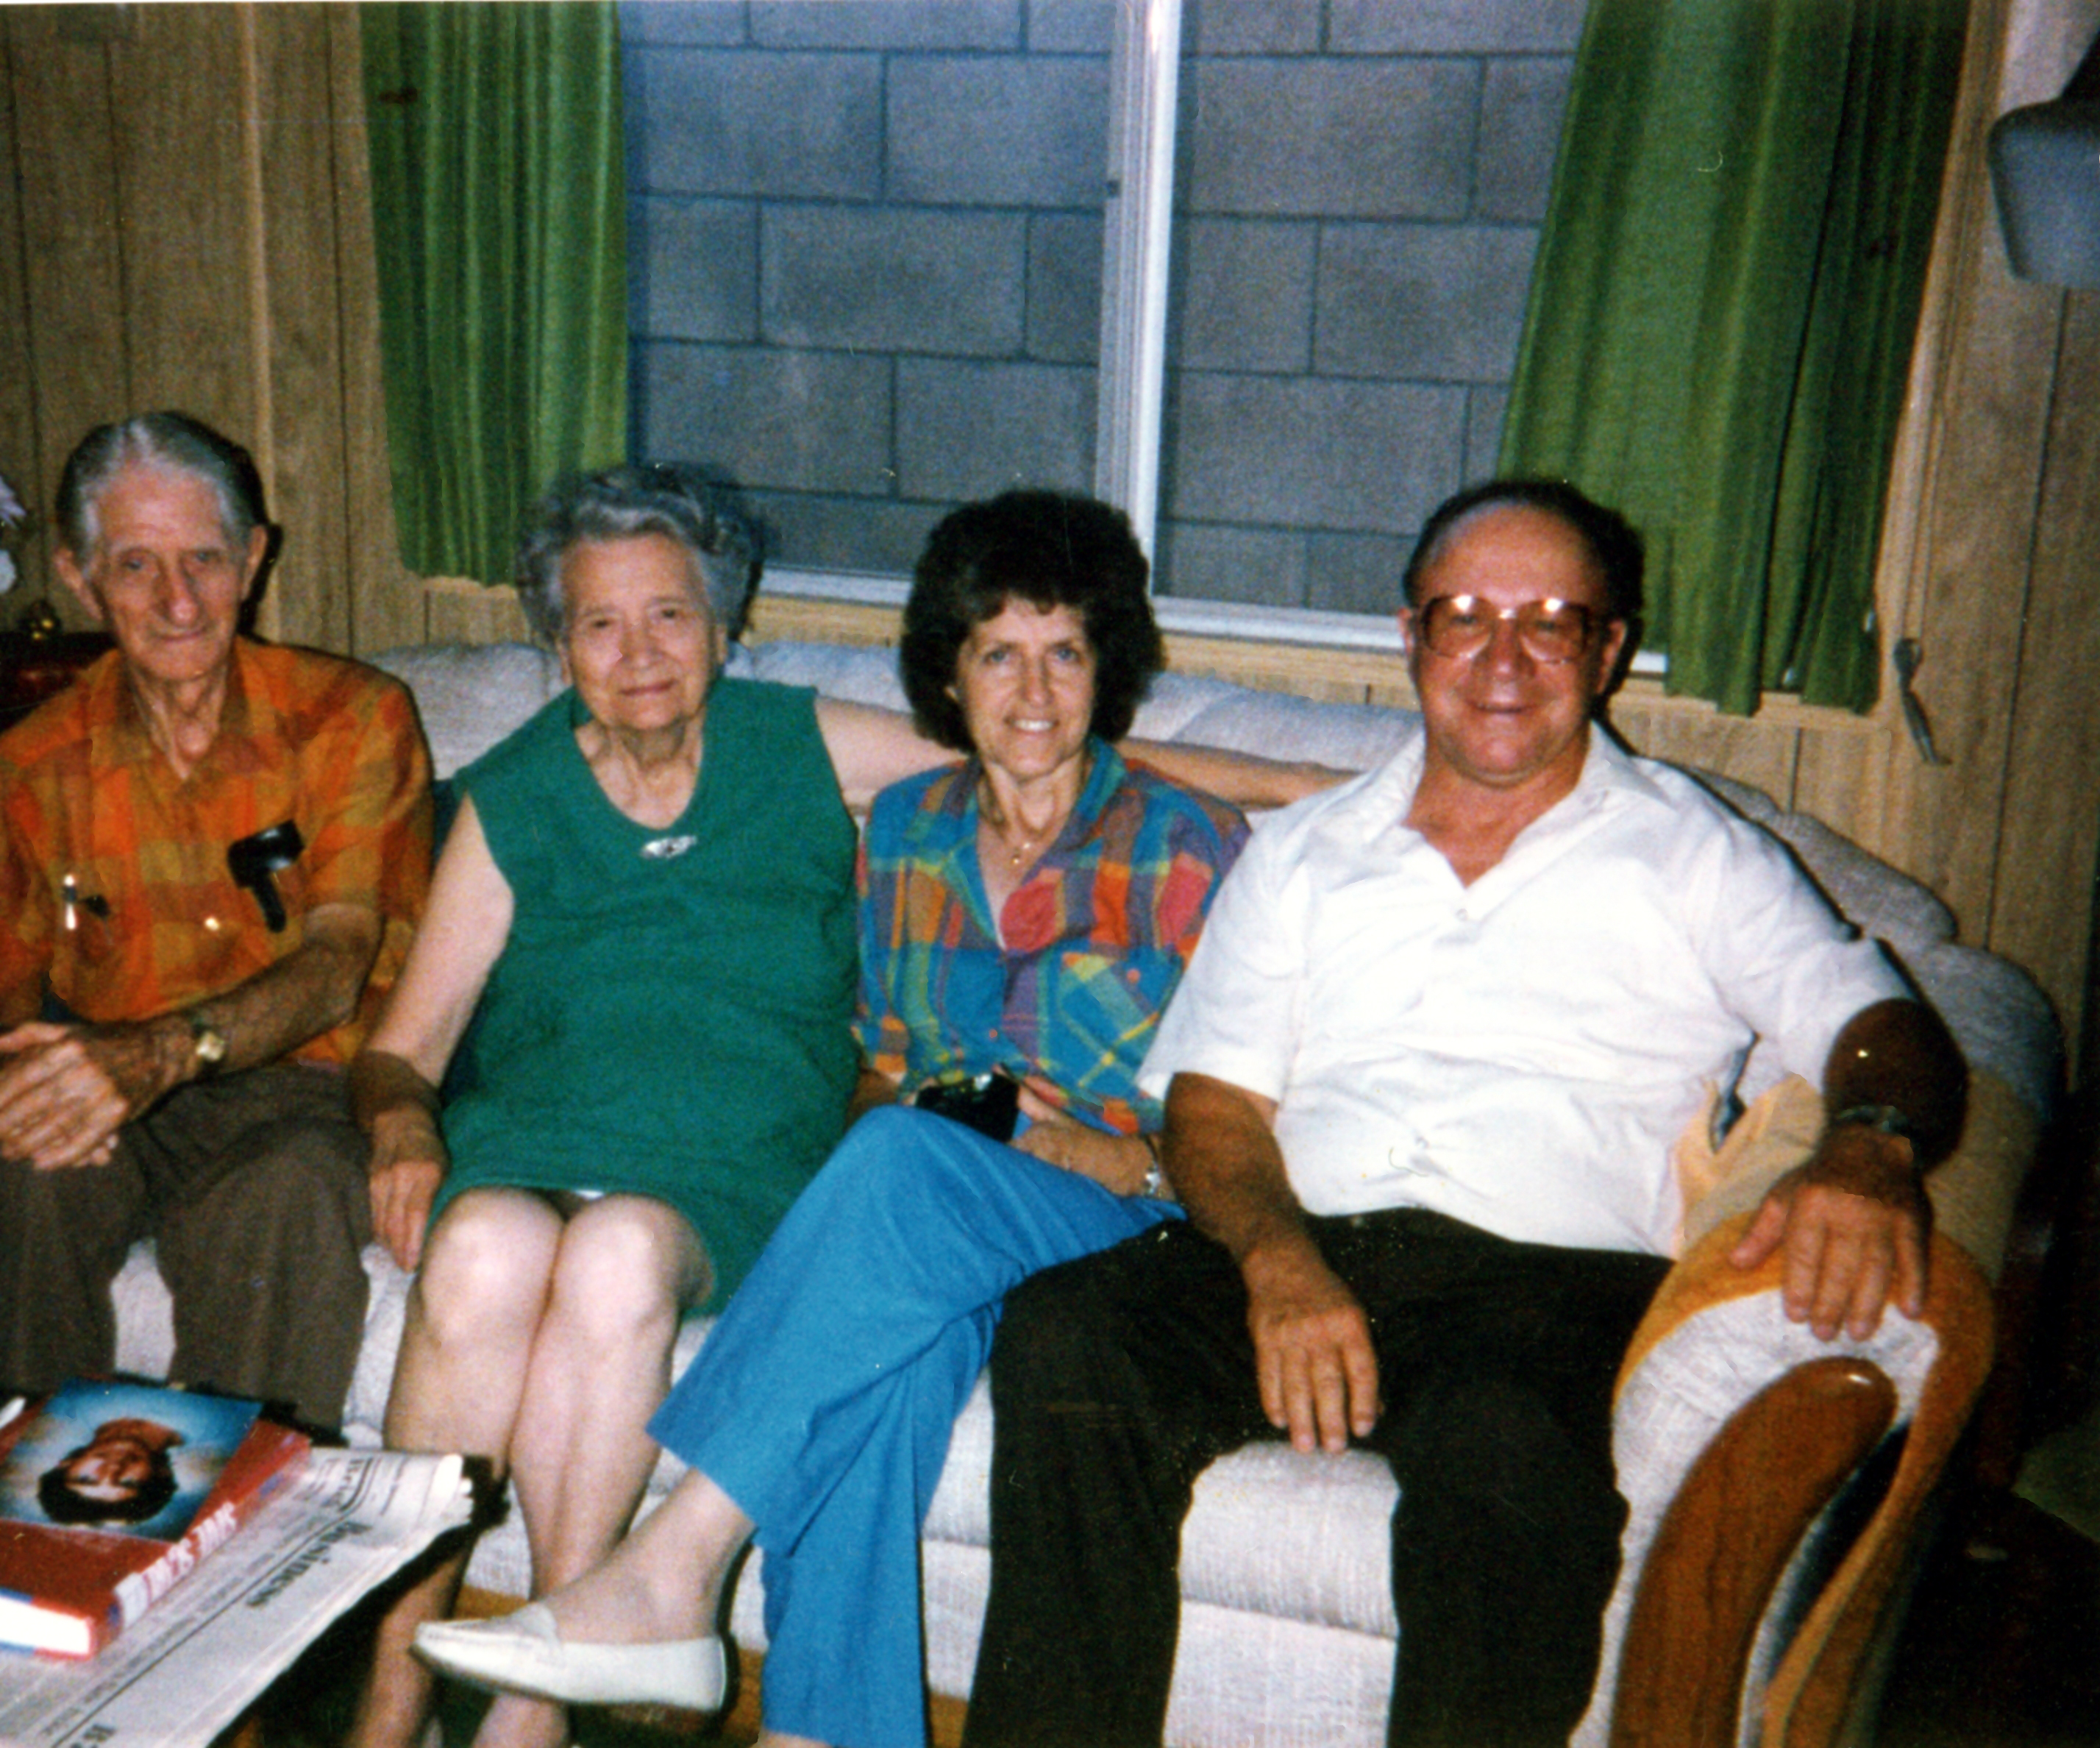 Wally and Agnes visiting with Uncle John and Aunt Sophia